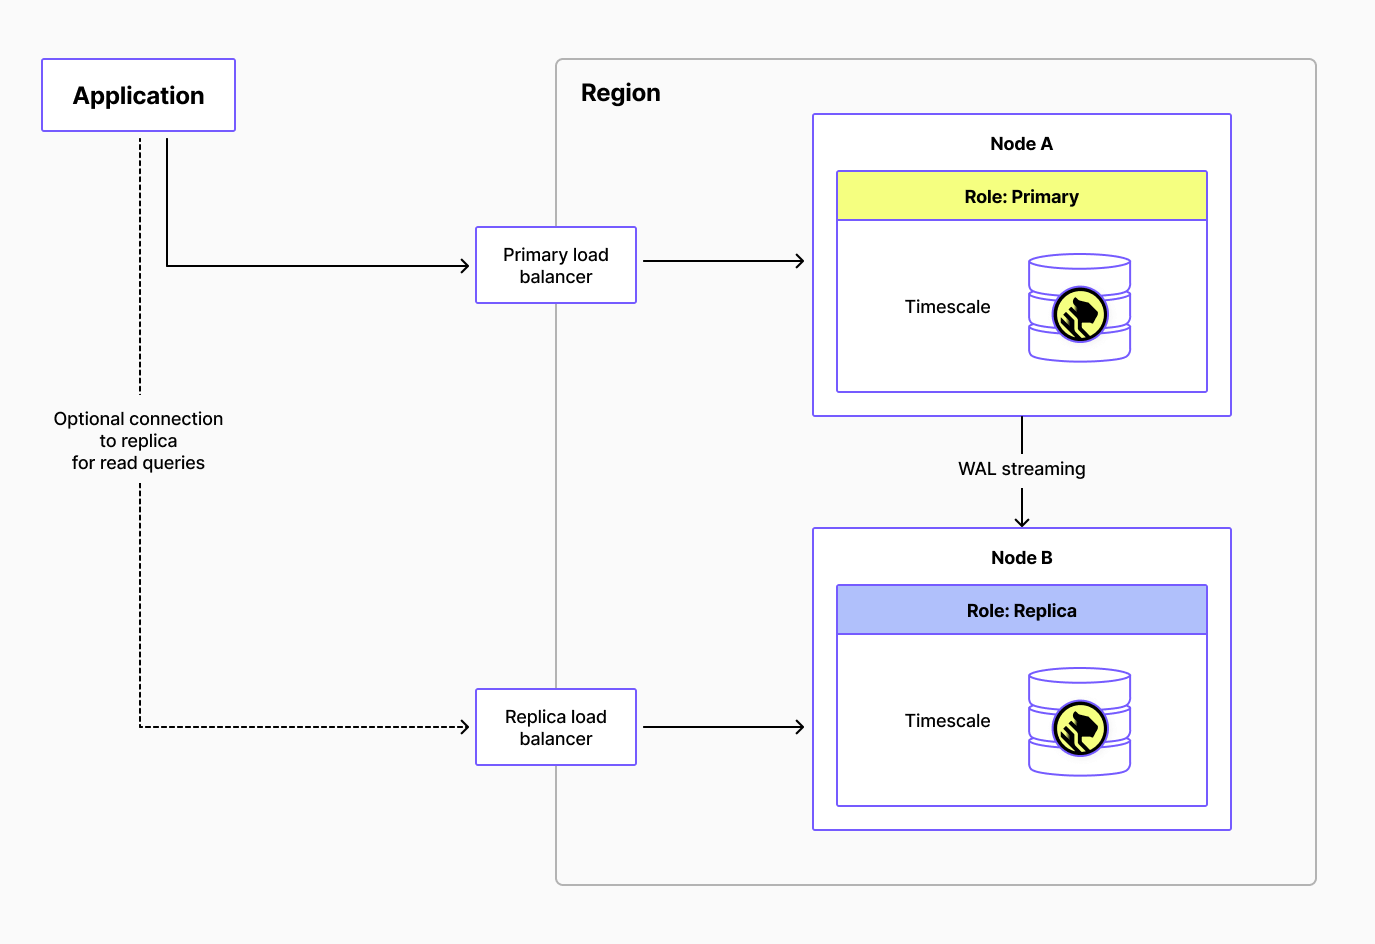 Figure describing a normal operating state where the application is connected to the primary and optionally to its replica. The load balancer handles the connection and defines the role for each node. 